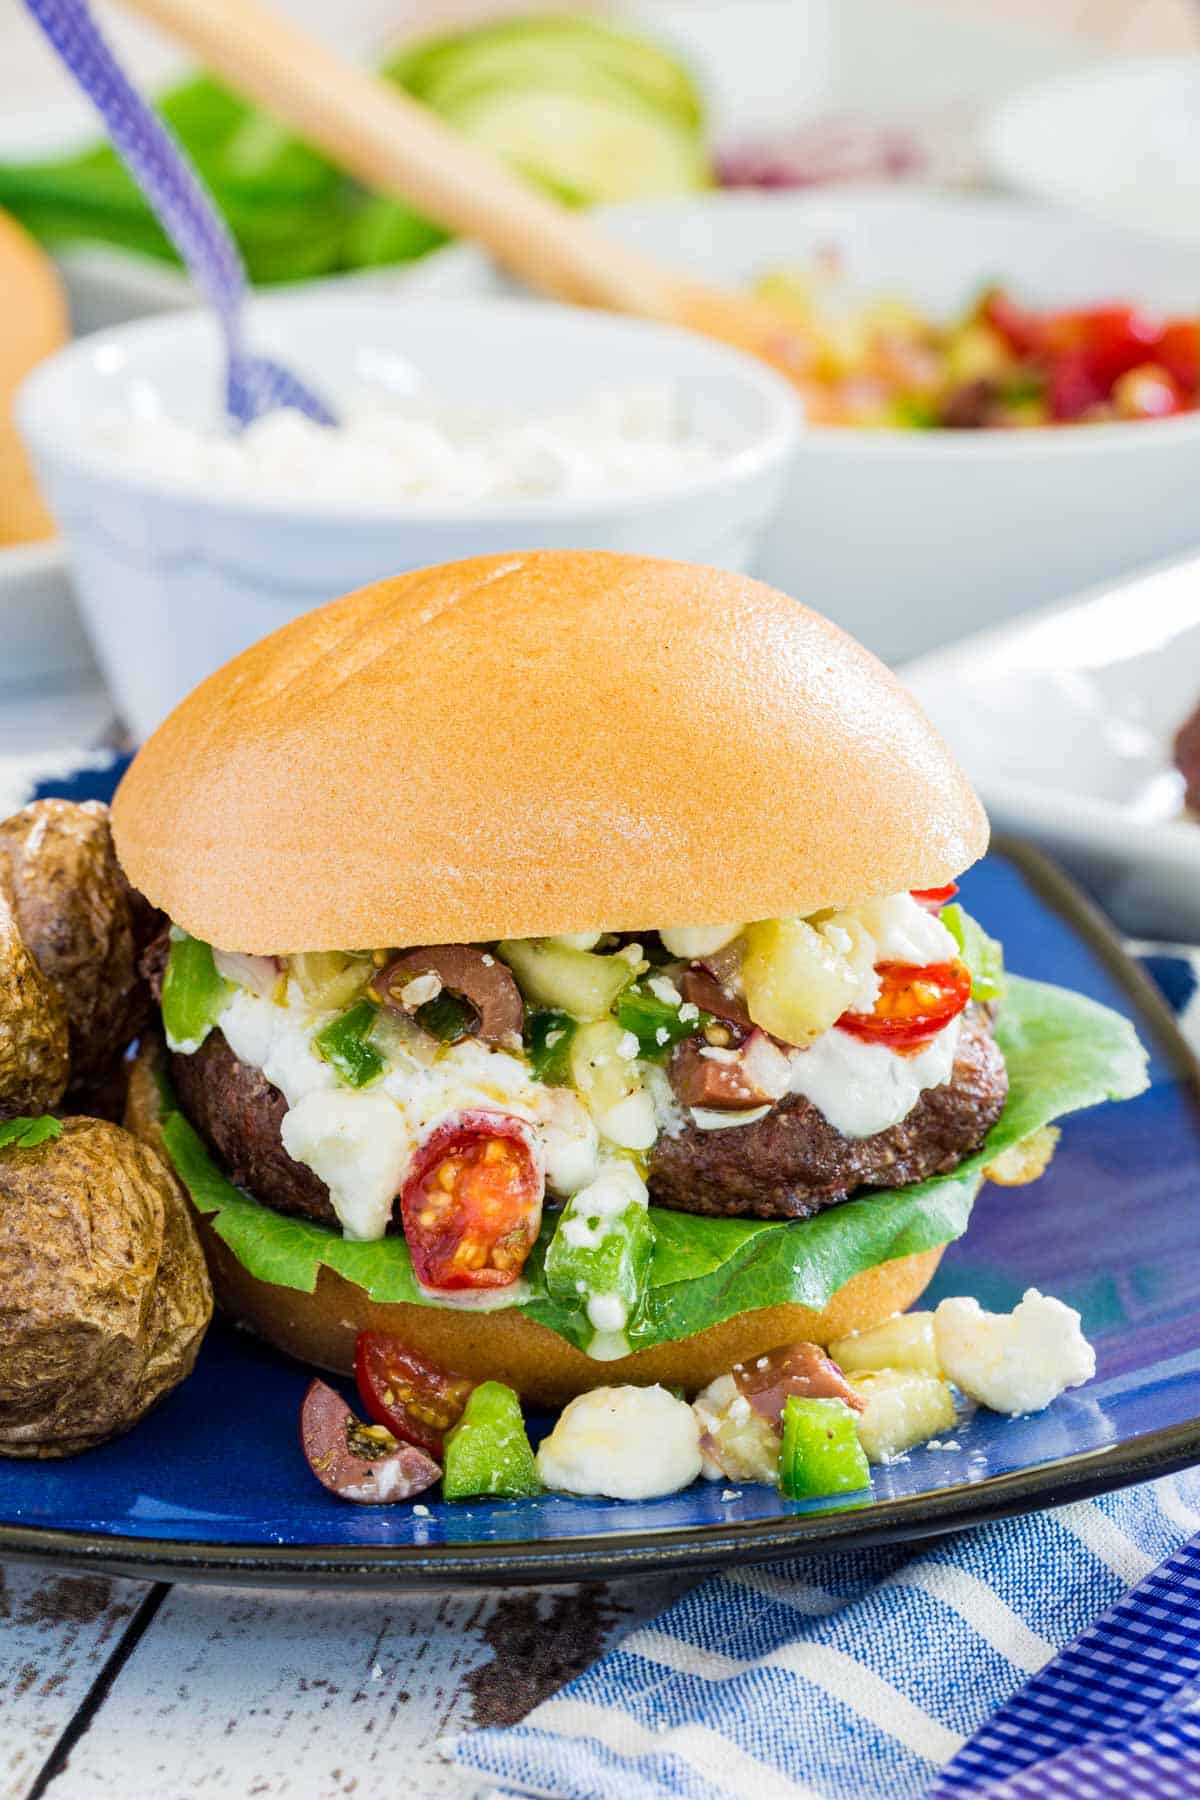 Gluten free burgers recipes round up by eatingworks.com.